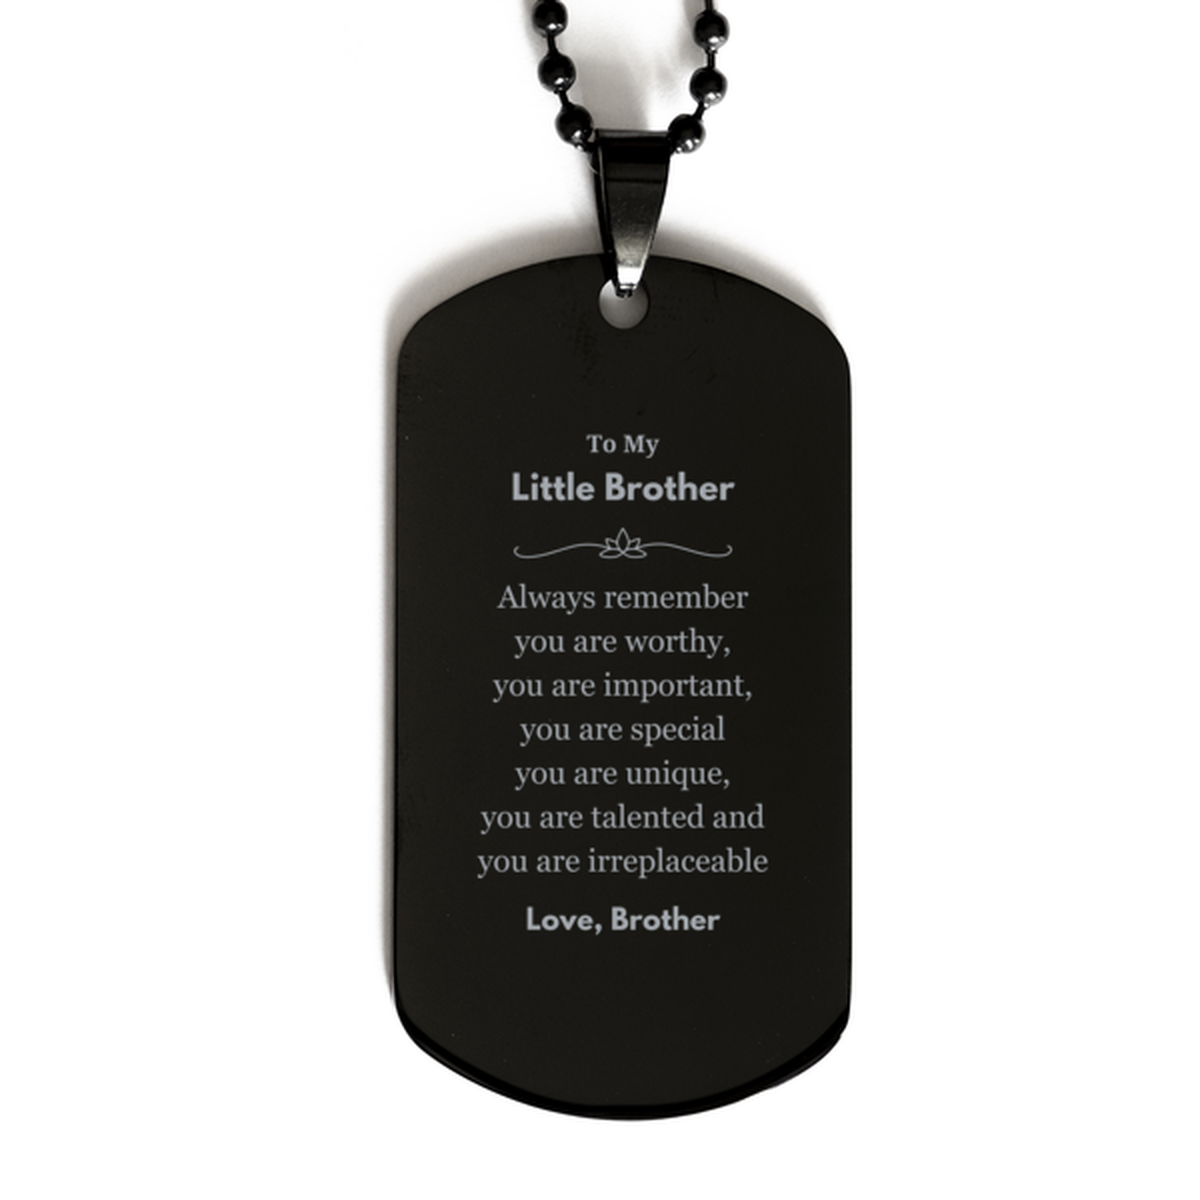 Little Brother Birthday Gifts from Brother, Inspirational Black Dog Tag for Little Brother Christmas Graduation Gifts for Little Brother Always remember you are worthy, you are important. Love, Brother